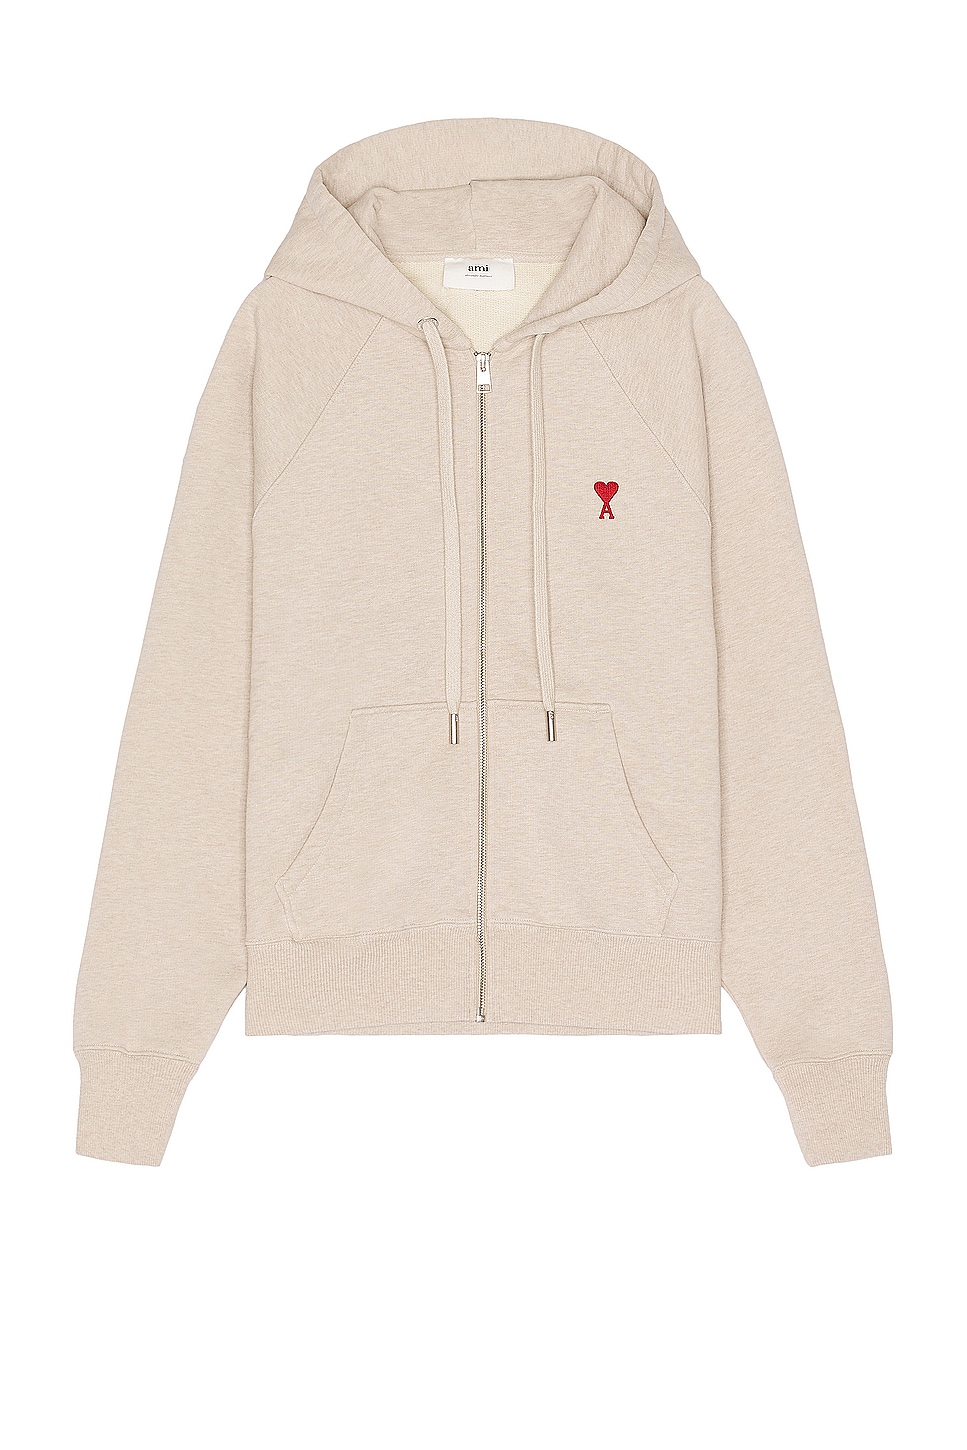 ADC Zipped Hoodie in Cream